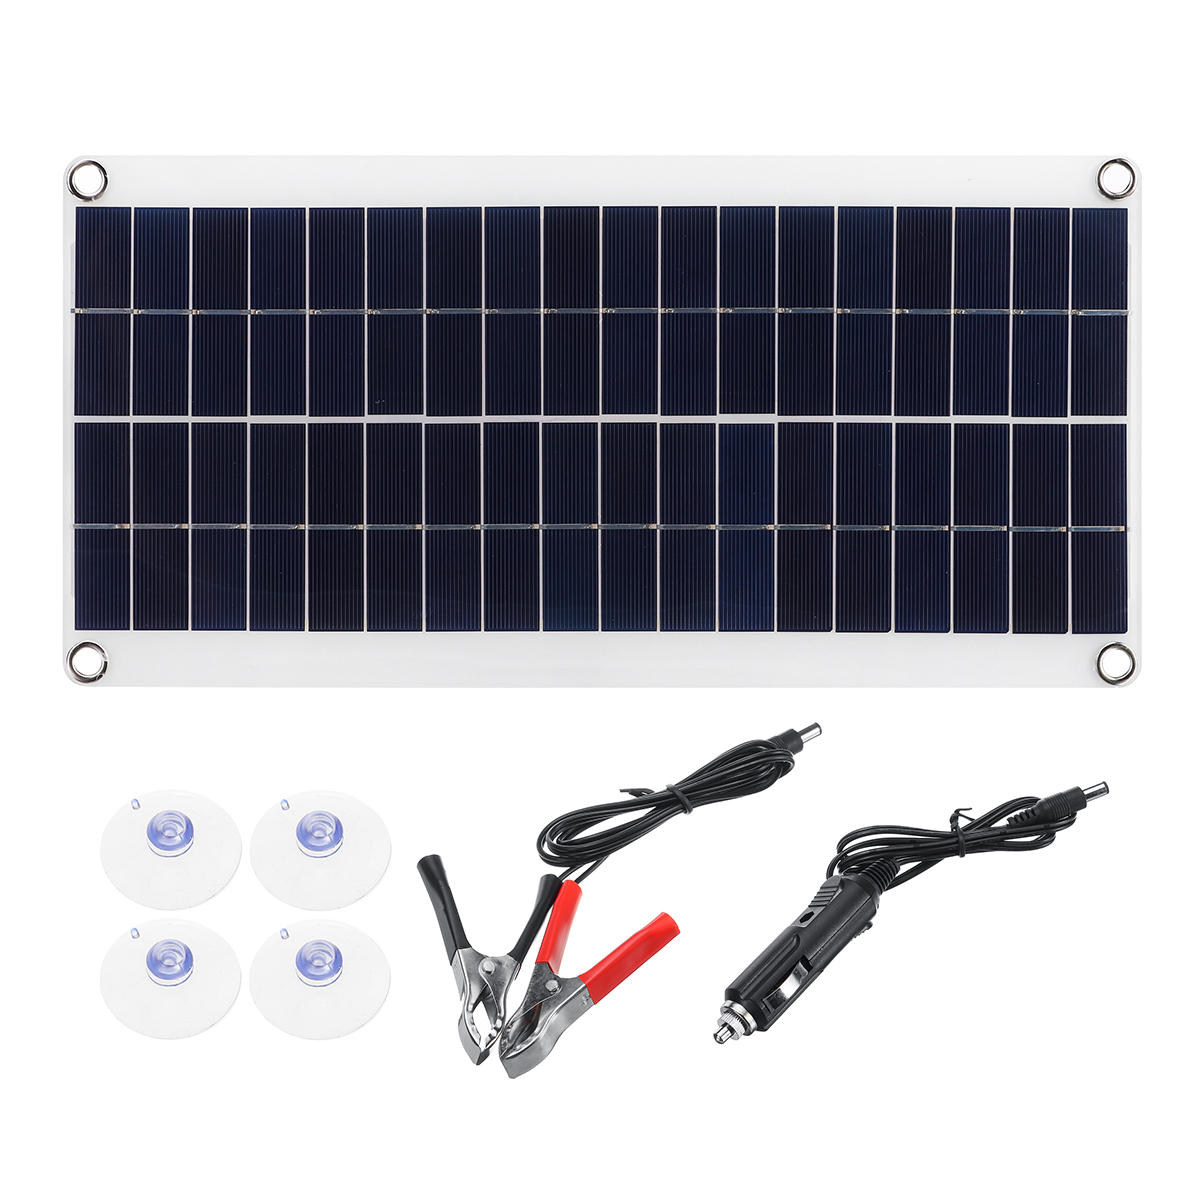 30W 18V Polysilicon zonnepaneel power systeem voor boot / dak / camping